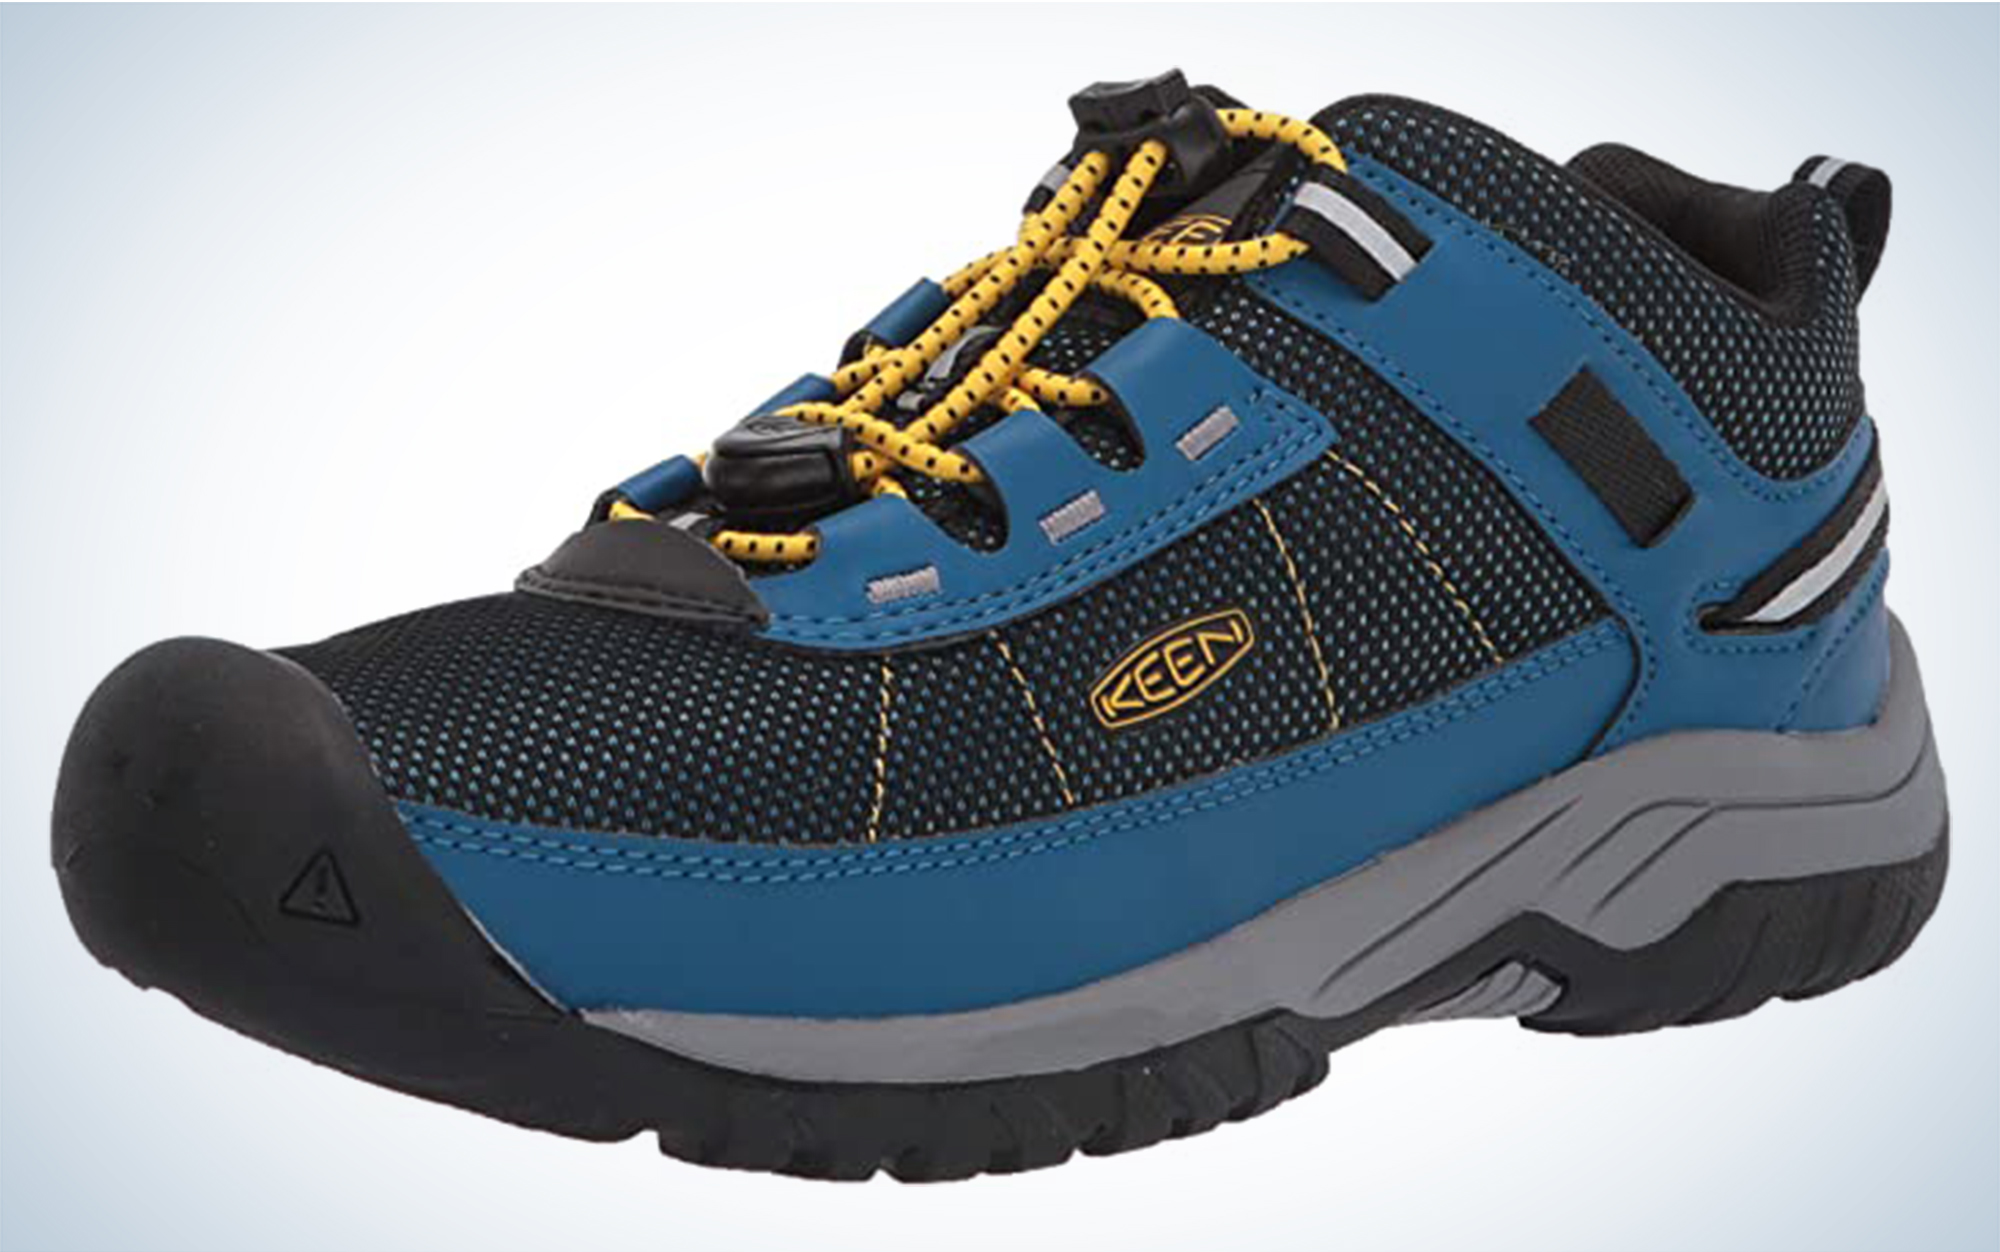 The KEEN Little Kids' Targhee Sport VentÂ are the most protective kids' hiking shoes.